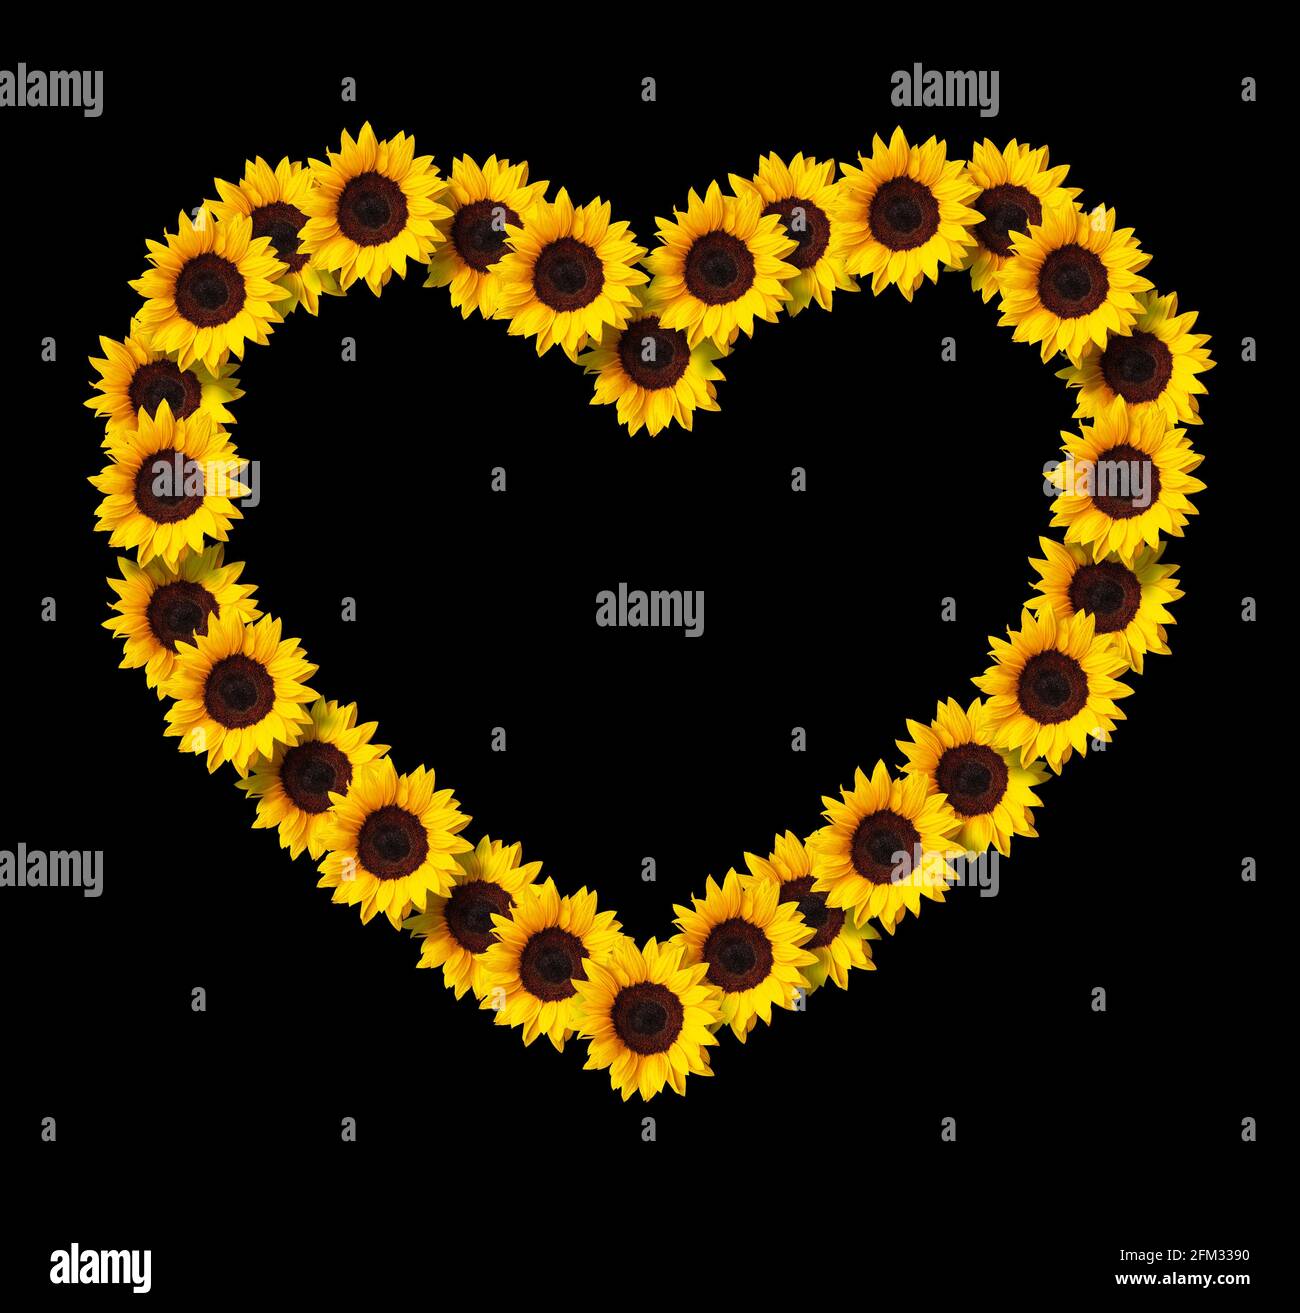 Heart shape frame made of yellow sunflowers flowers isolated on black background. Design element for love concepts designs. Ideal for mothers day and Stock Photo